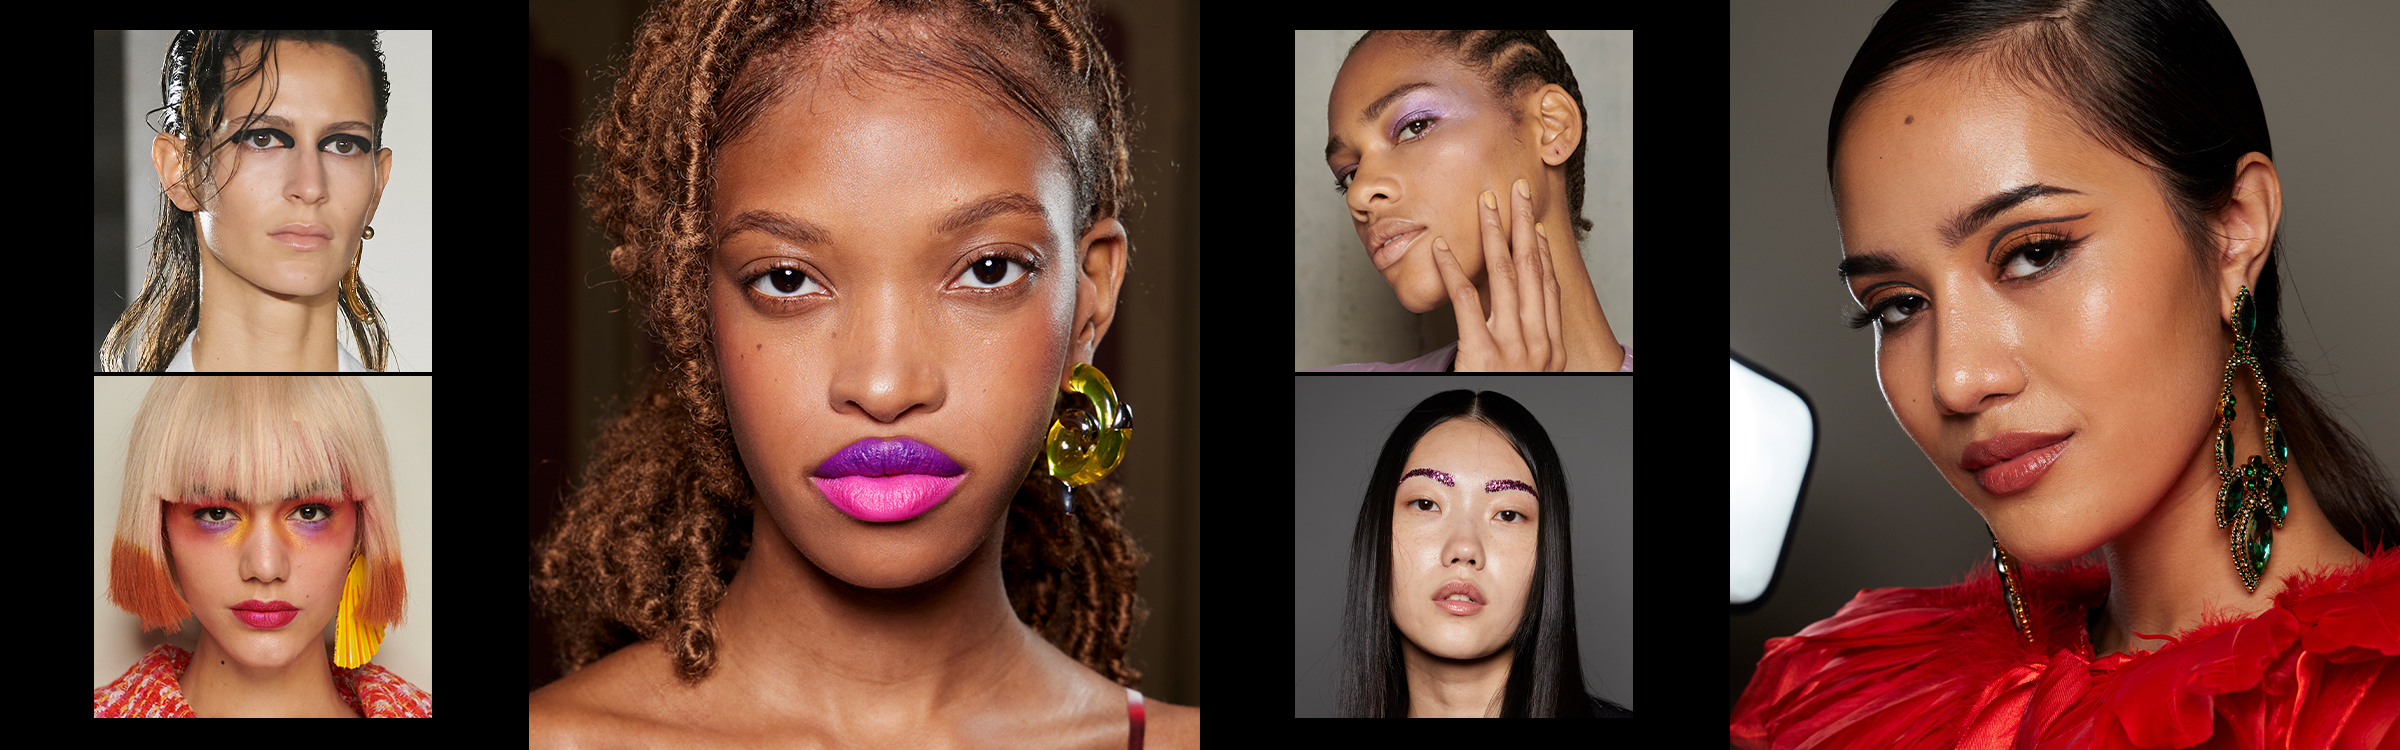 11 Beauty Trends From Every Fashion Week City That Have Me Totally Bewitched